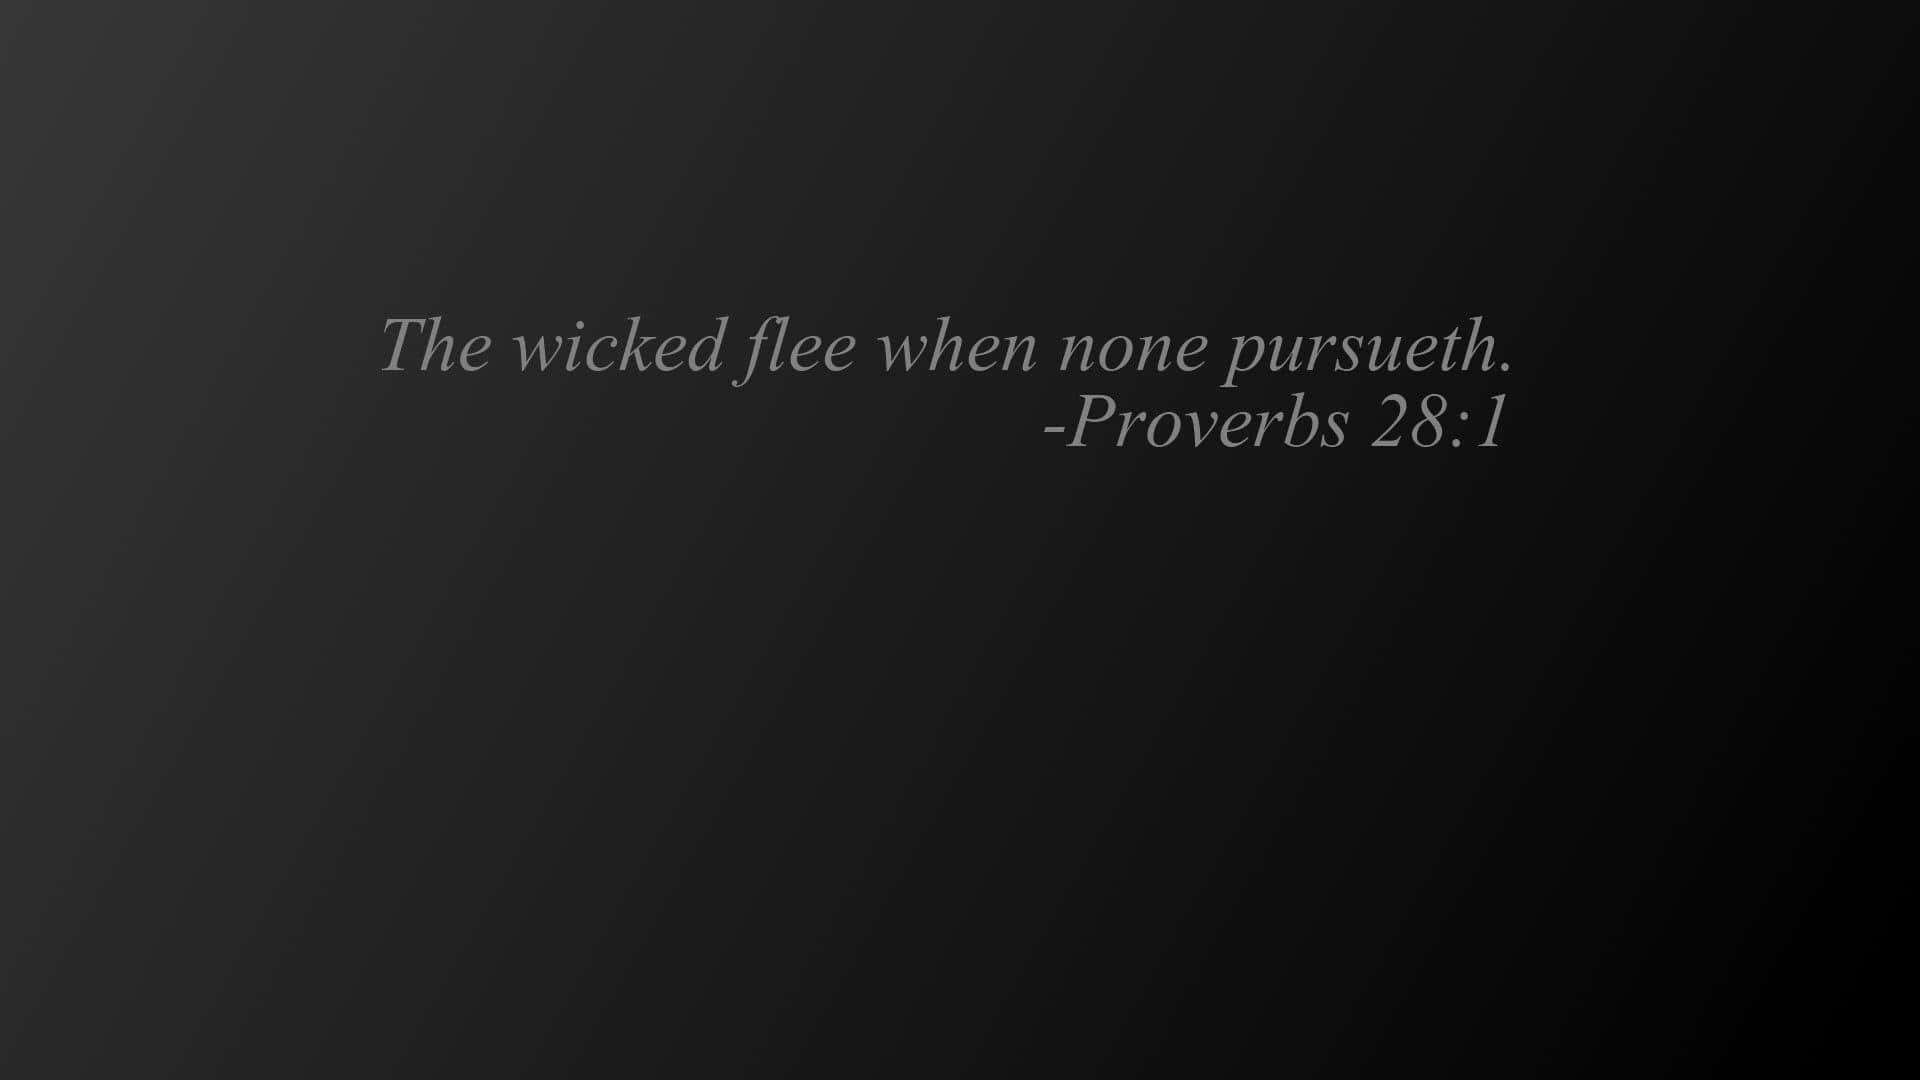 Dark Desktop Theme With Proverbial Quote Wallpaper